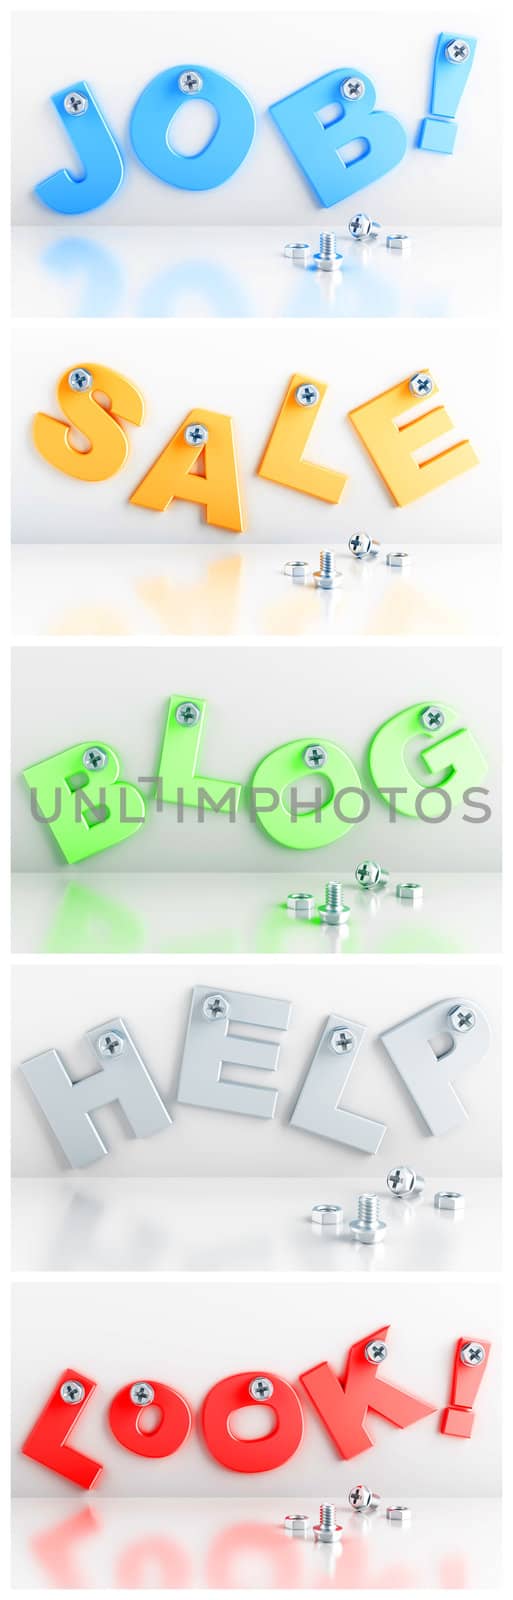 varicolored words attached with bolts on a white background